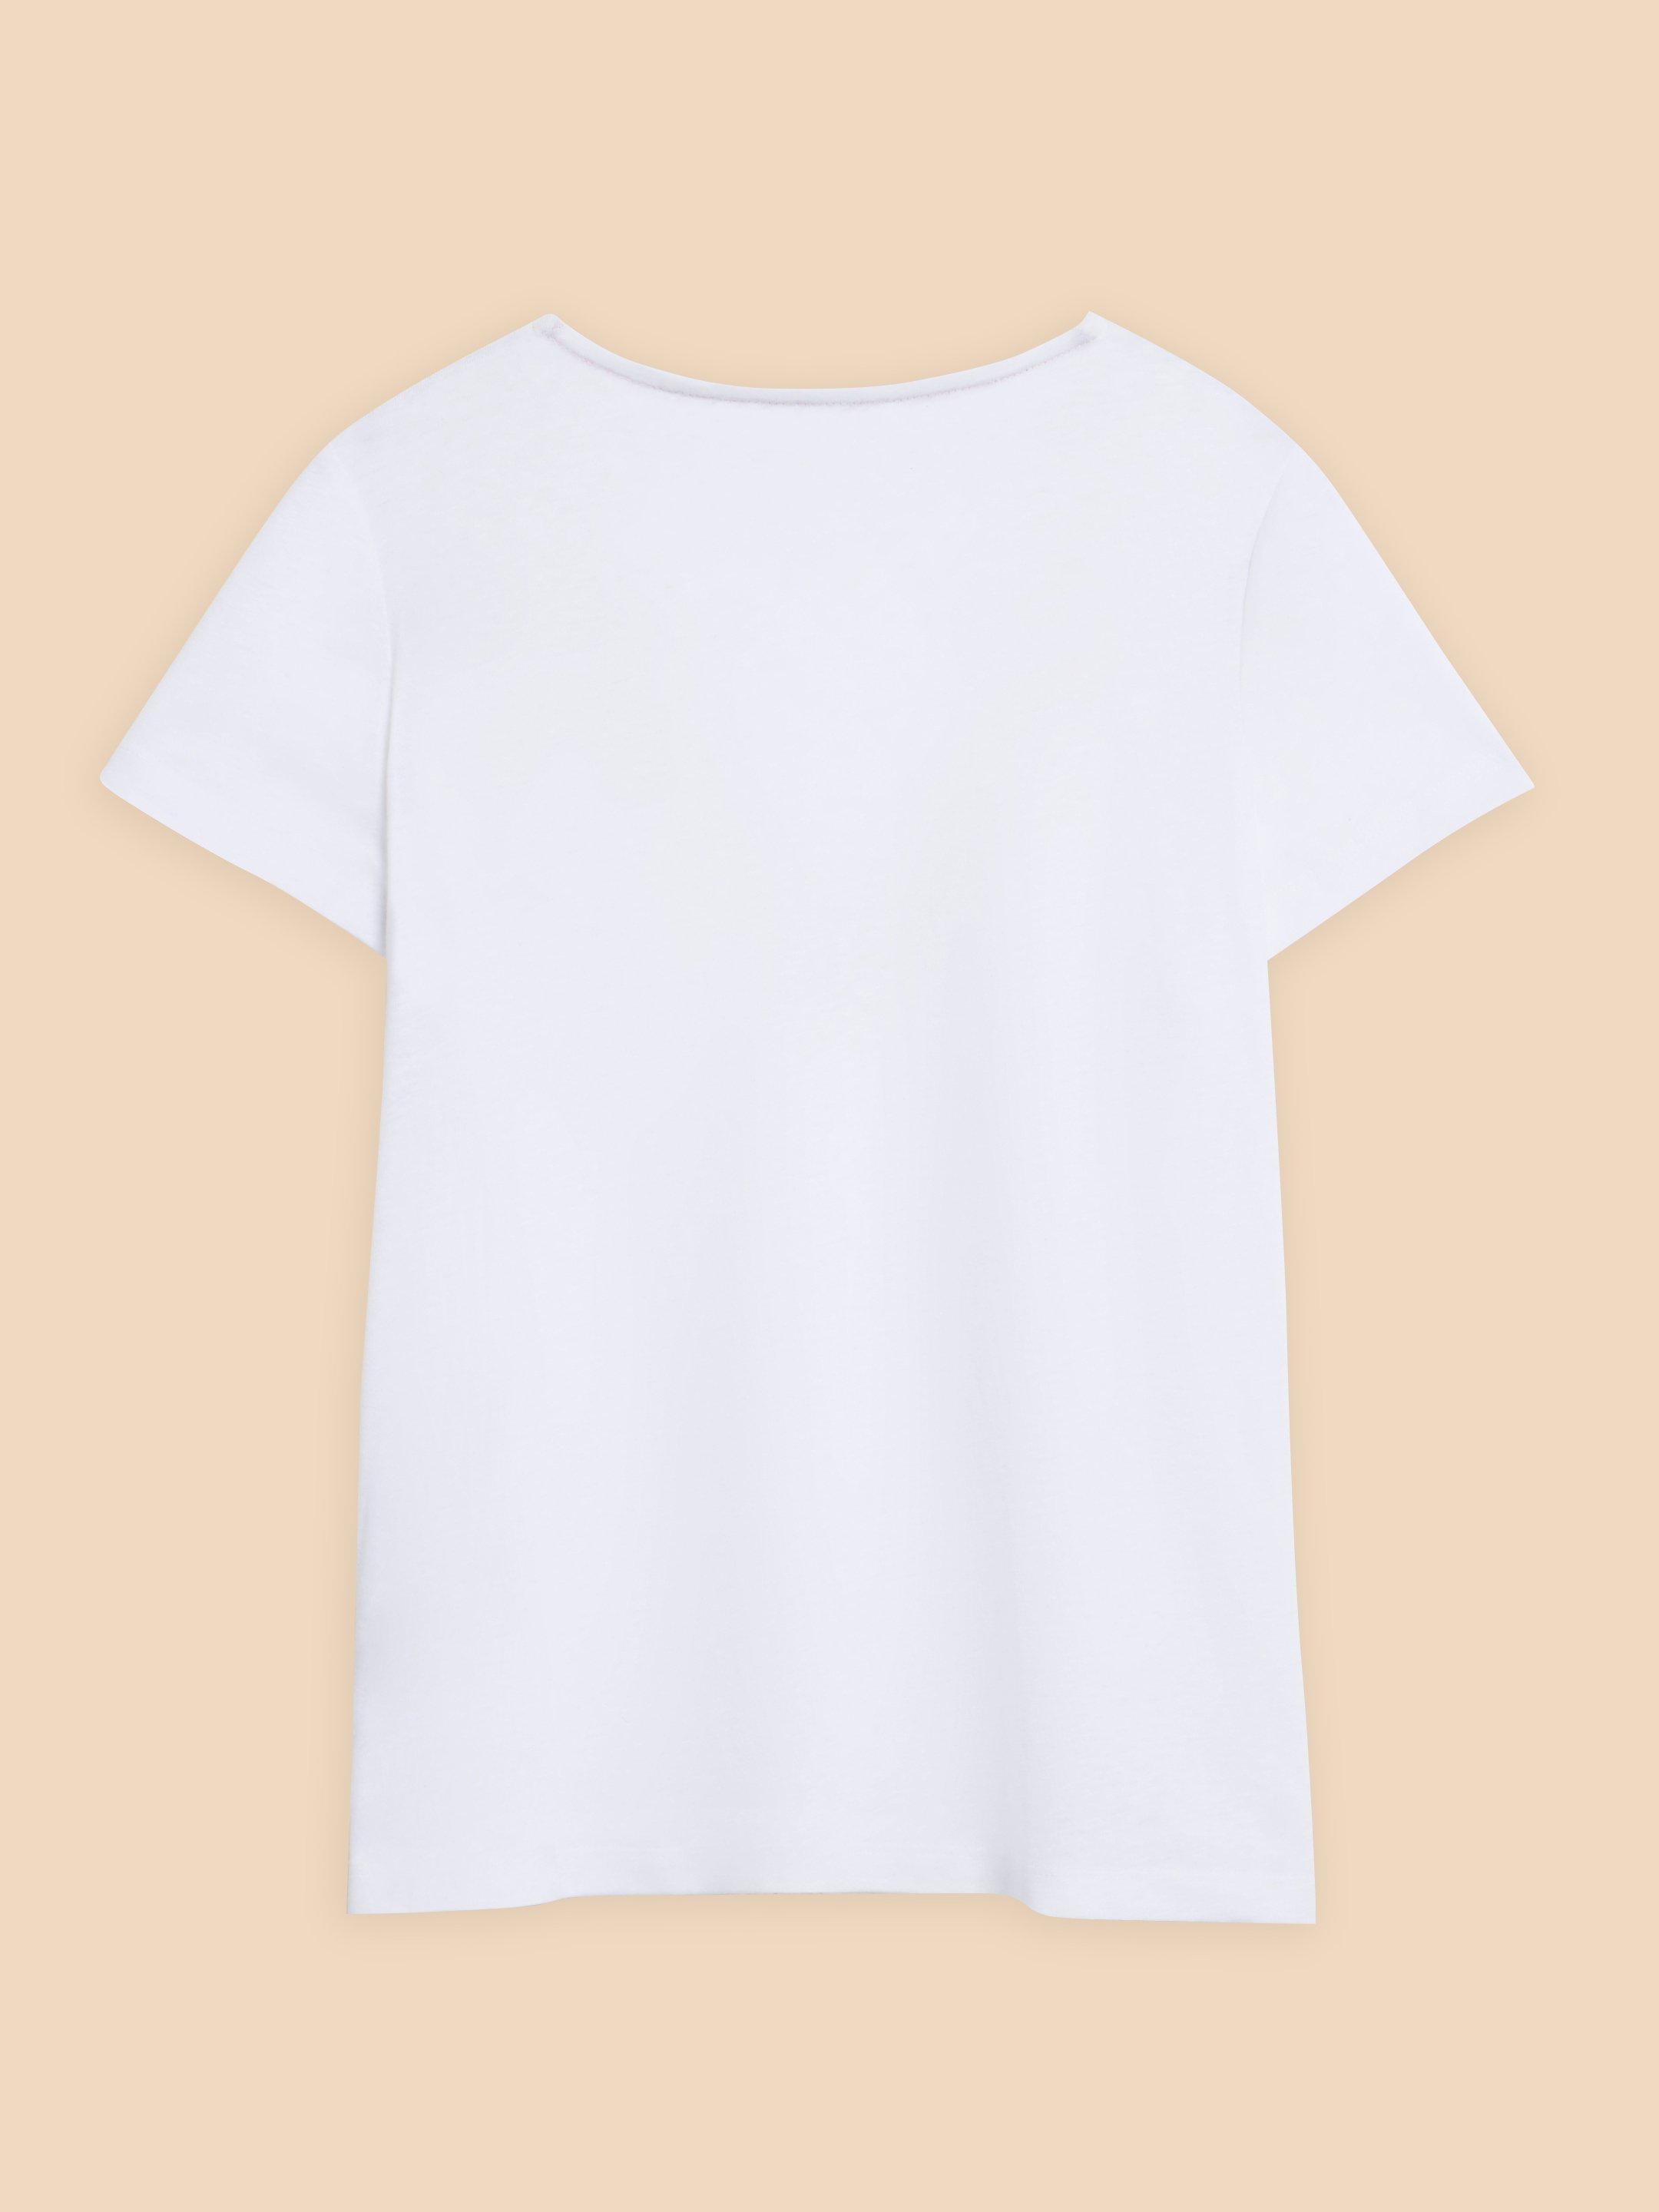 ELLIE LACE TEE in BRIL WHITE - FLAT BACK